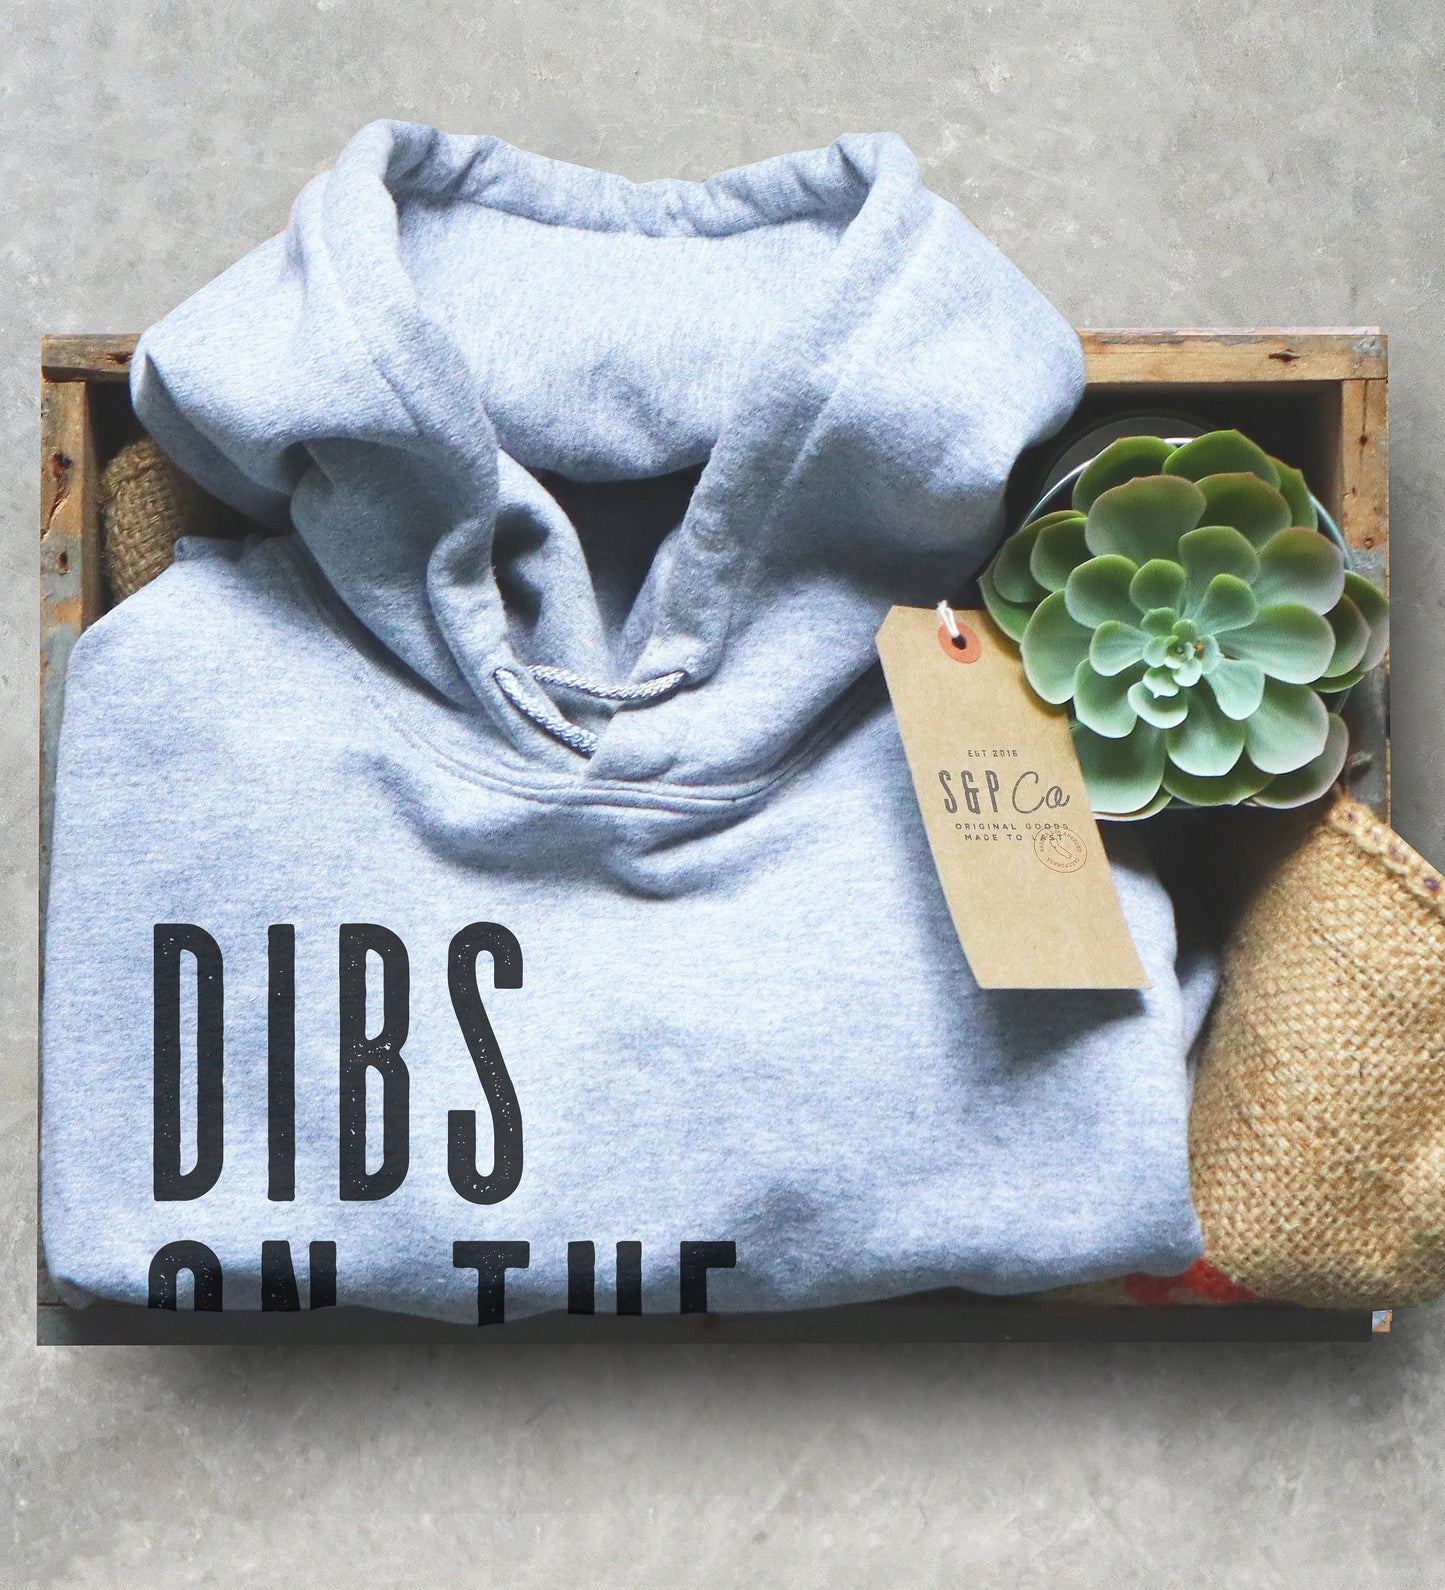 Dibs On The Lead Singer Hoodie - Band shirt, Concert shirt, Concert shirts, Lead band singer, Music festival shirt, Concert groupie